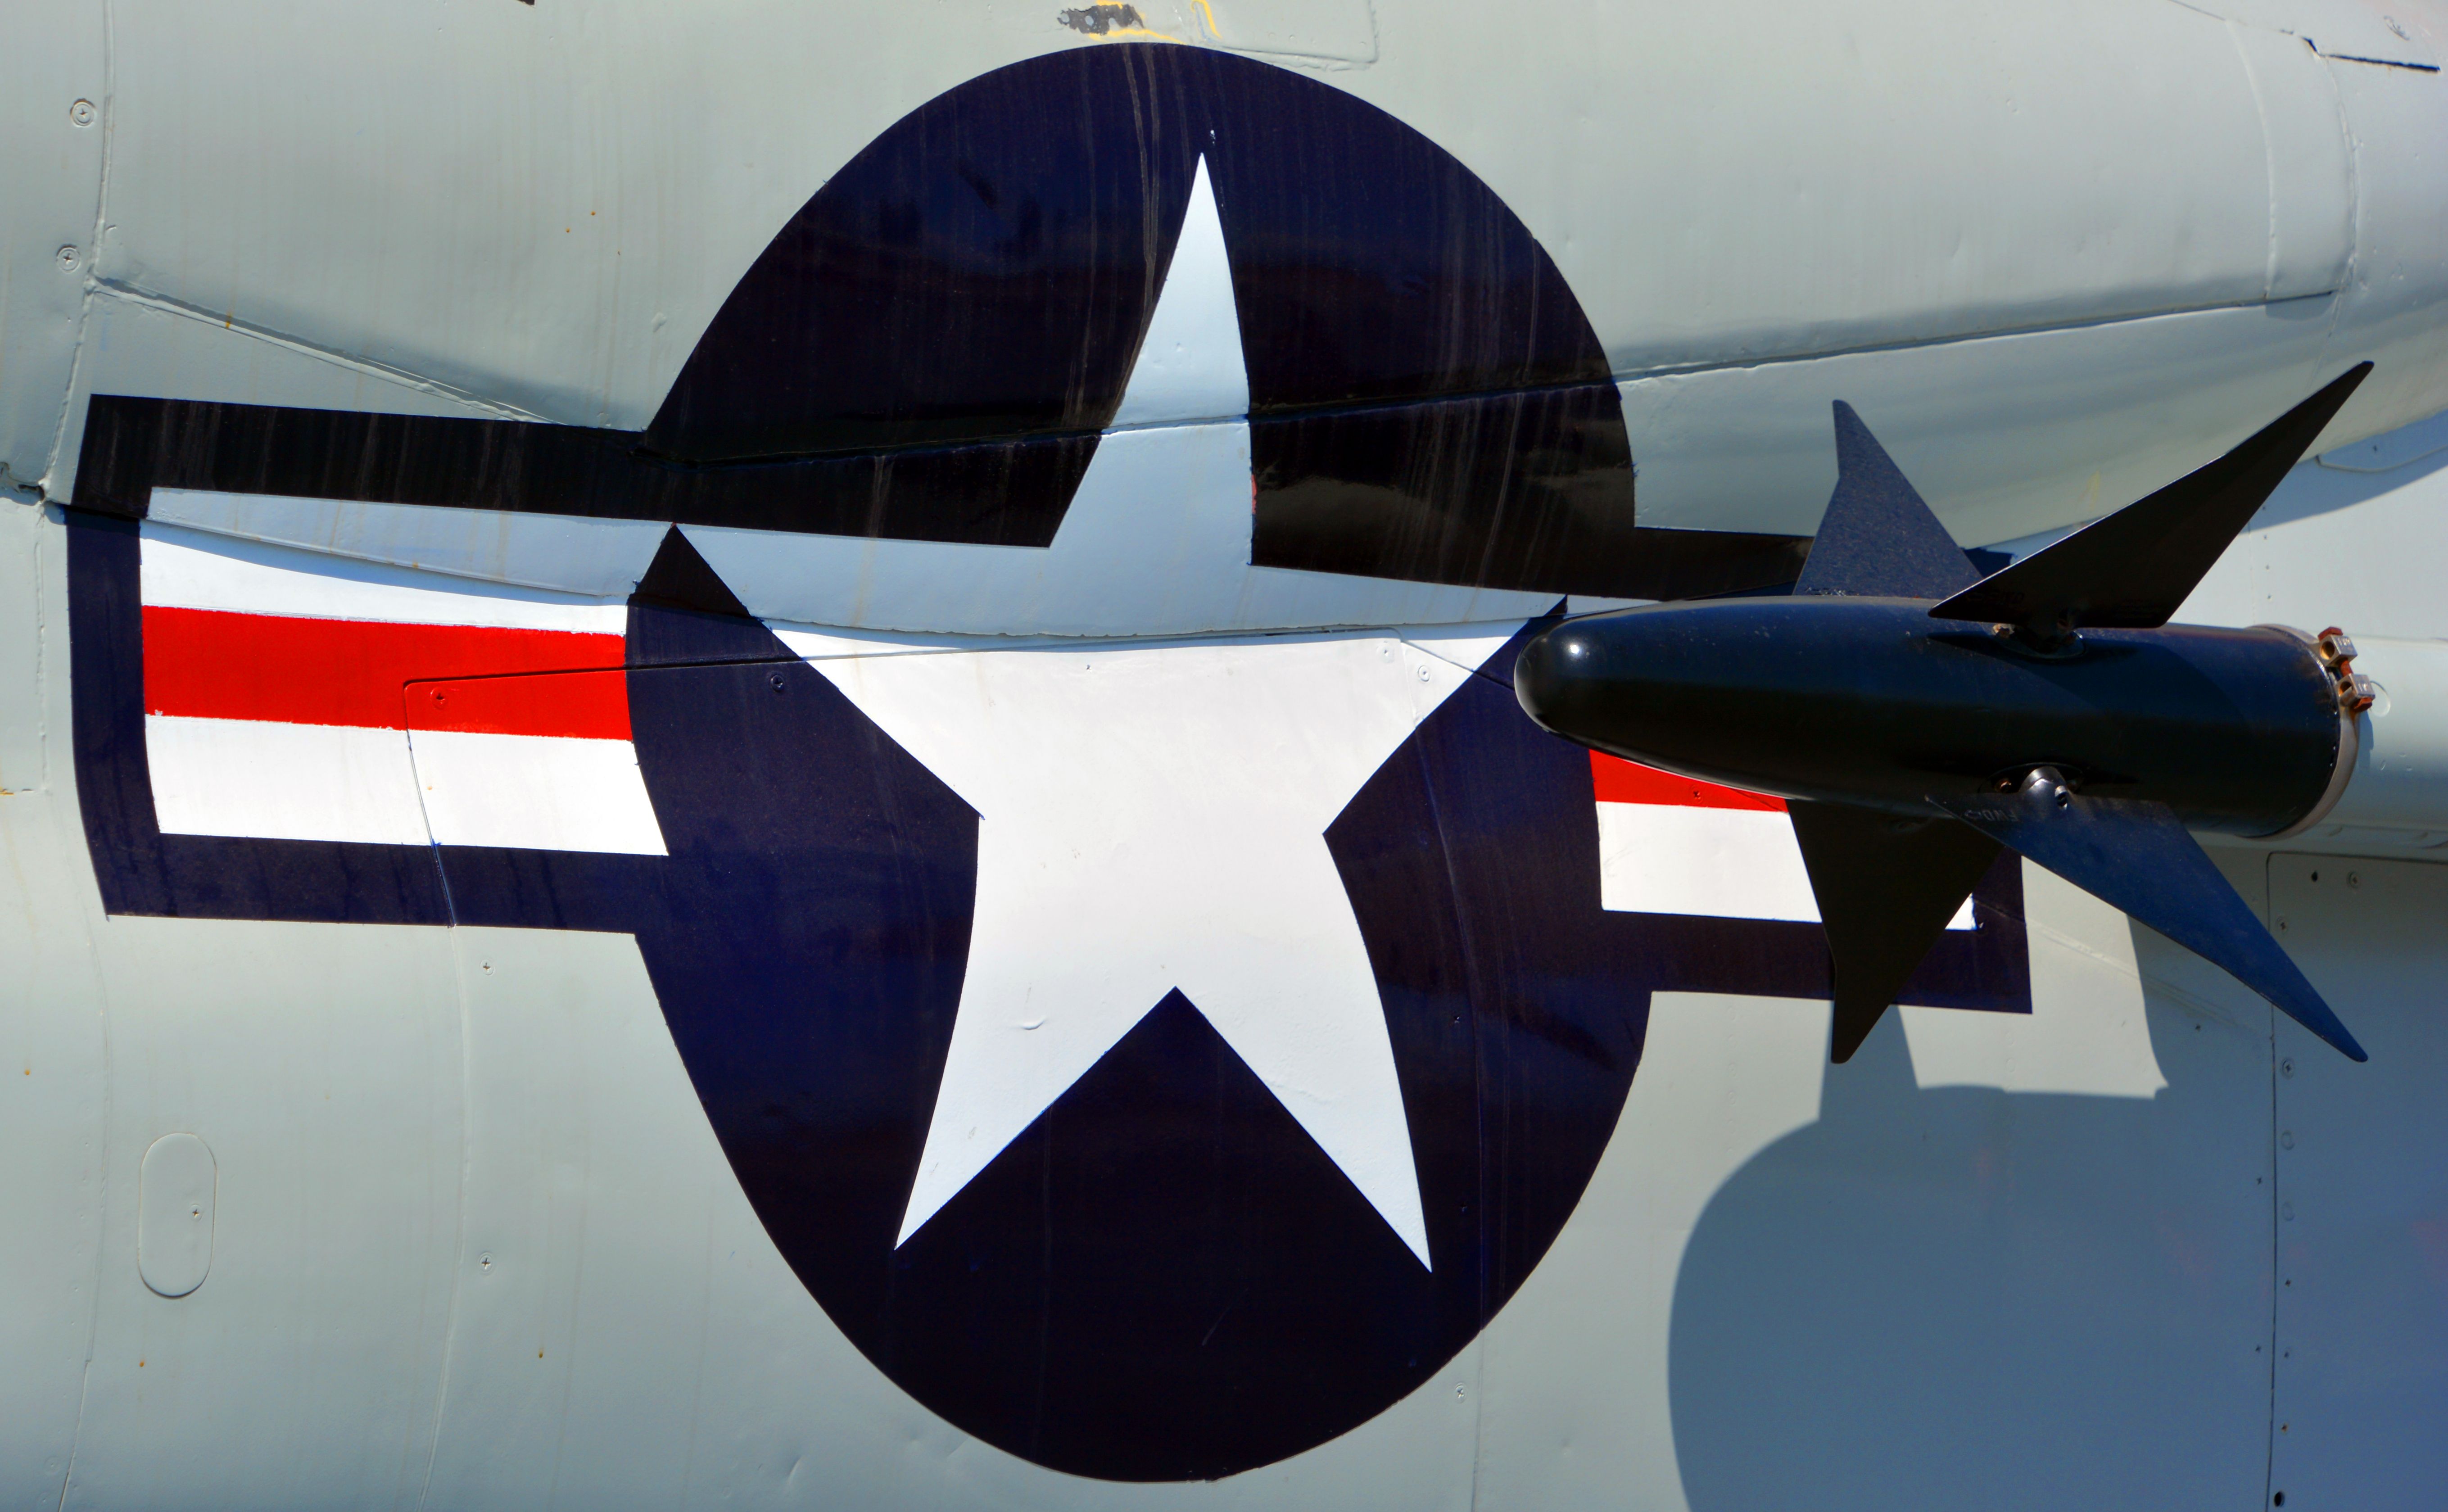 S Aircraft Military Insignia Markings used during World War II. Commonly referred to as "star and bars" or "roundels".